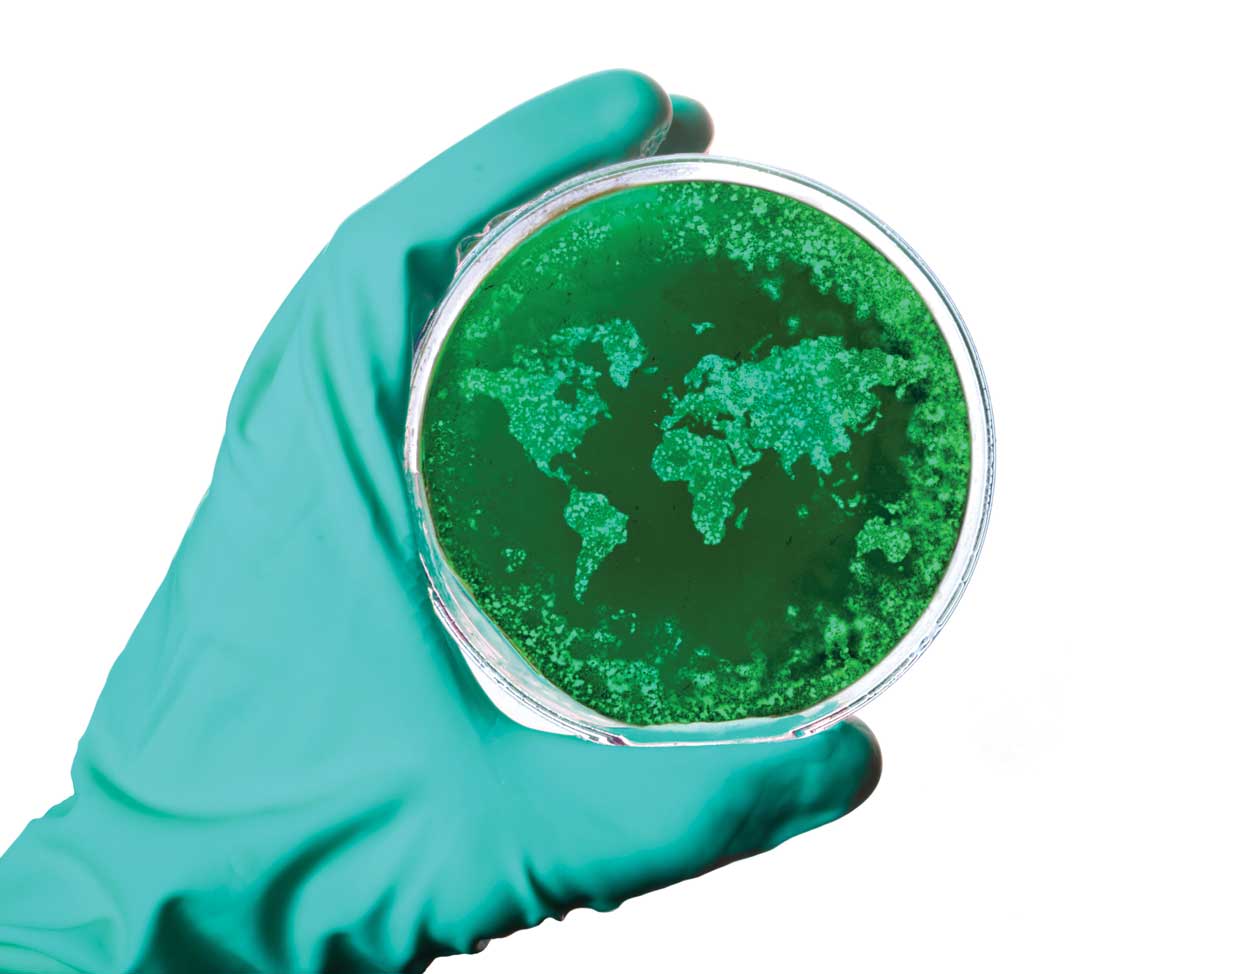 petri dish with bacteria that look like the world map